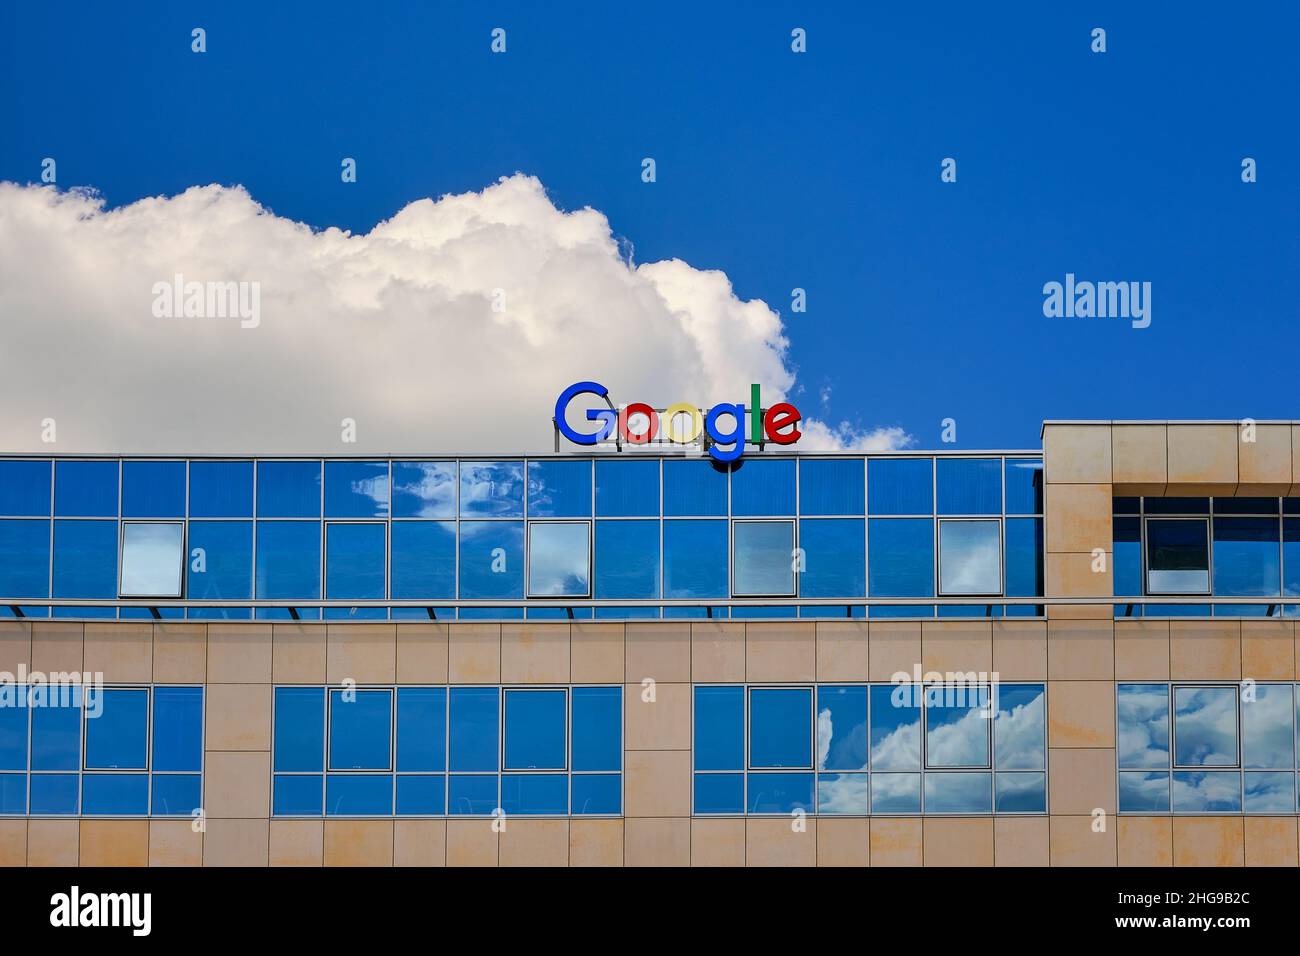 Wroclaw, Poland - Jun 6, 2021. Google sign or logo on top of the office building. Blue sky, daytime, big white cloud. Stock Photo